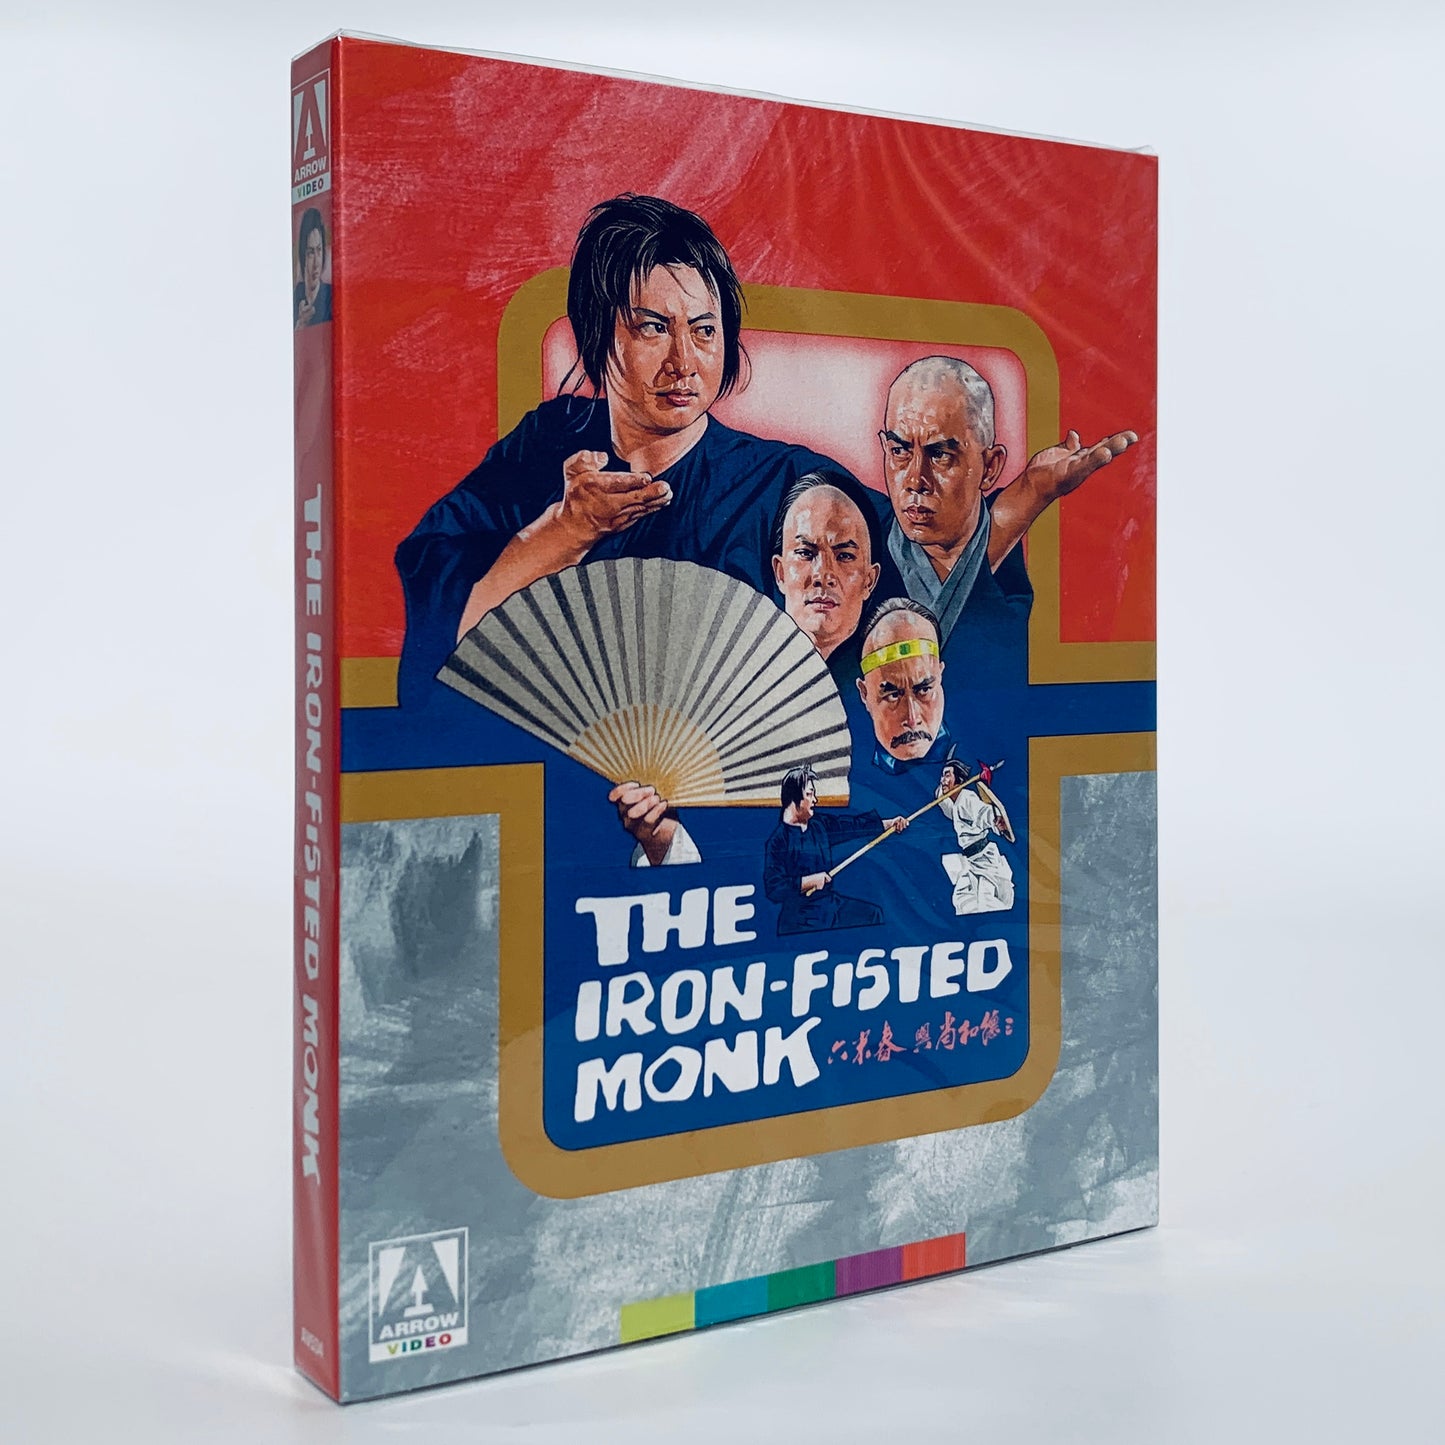 The Iron Fisted Monk Sammo Hung Slipcase Limited Blu-ray Arrow